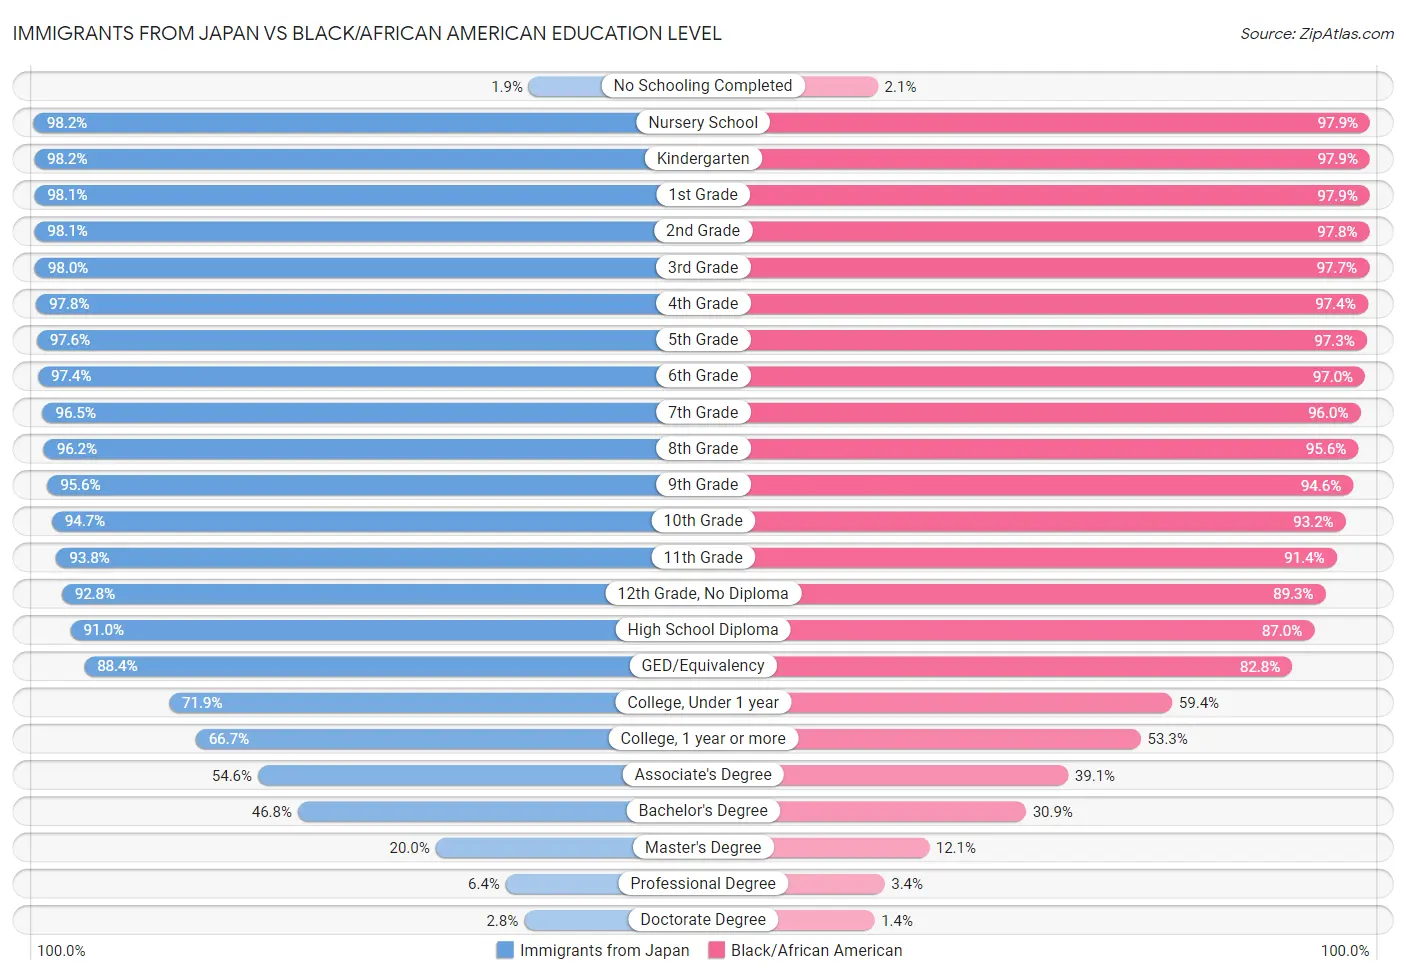 Immigrants from Japan vs Black/African American Education Level